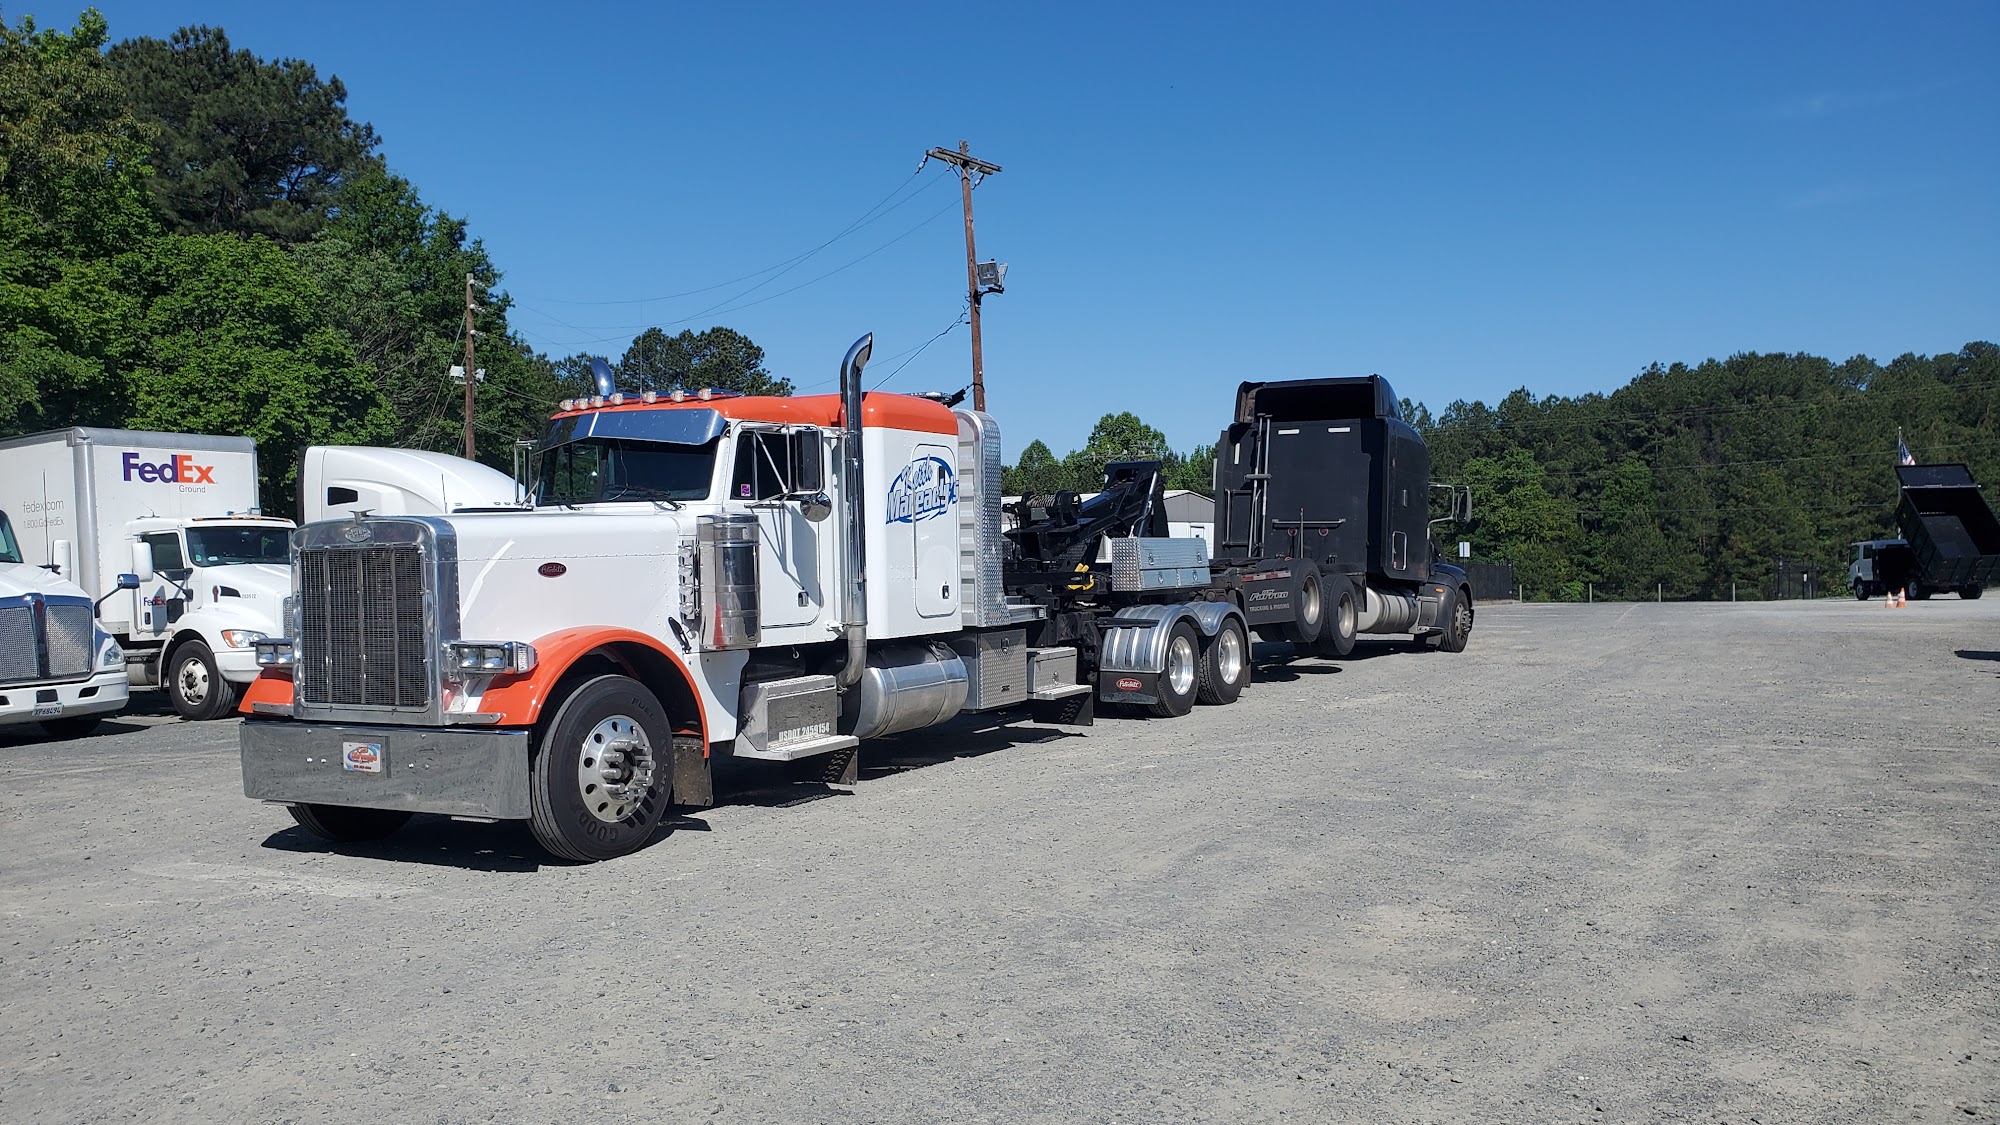 A Keith Maready Towing and Recovery